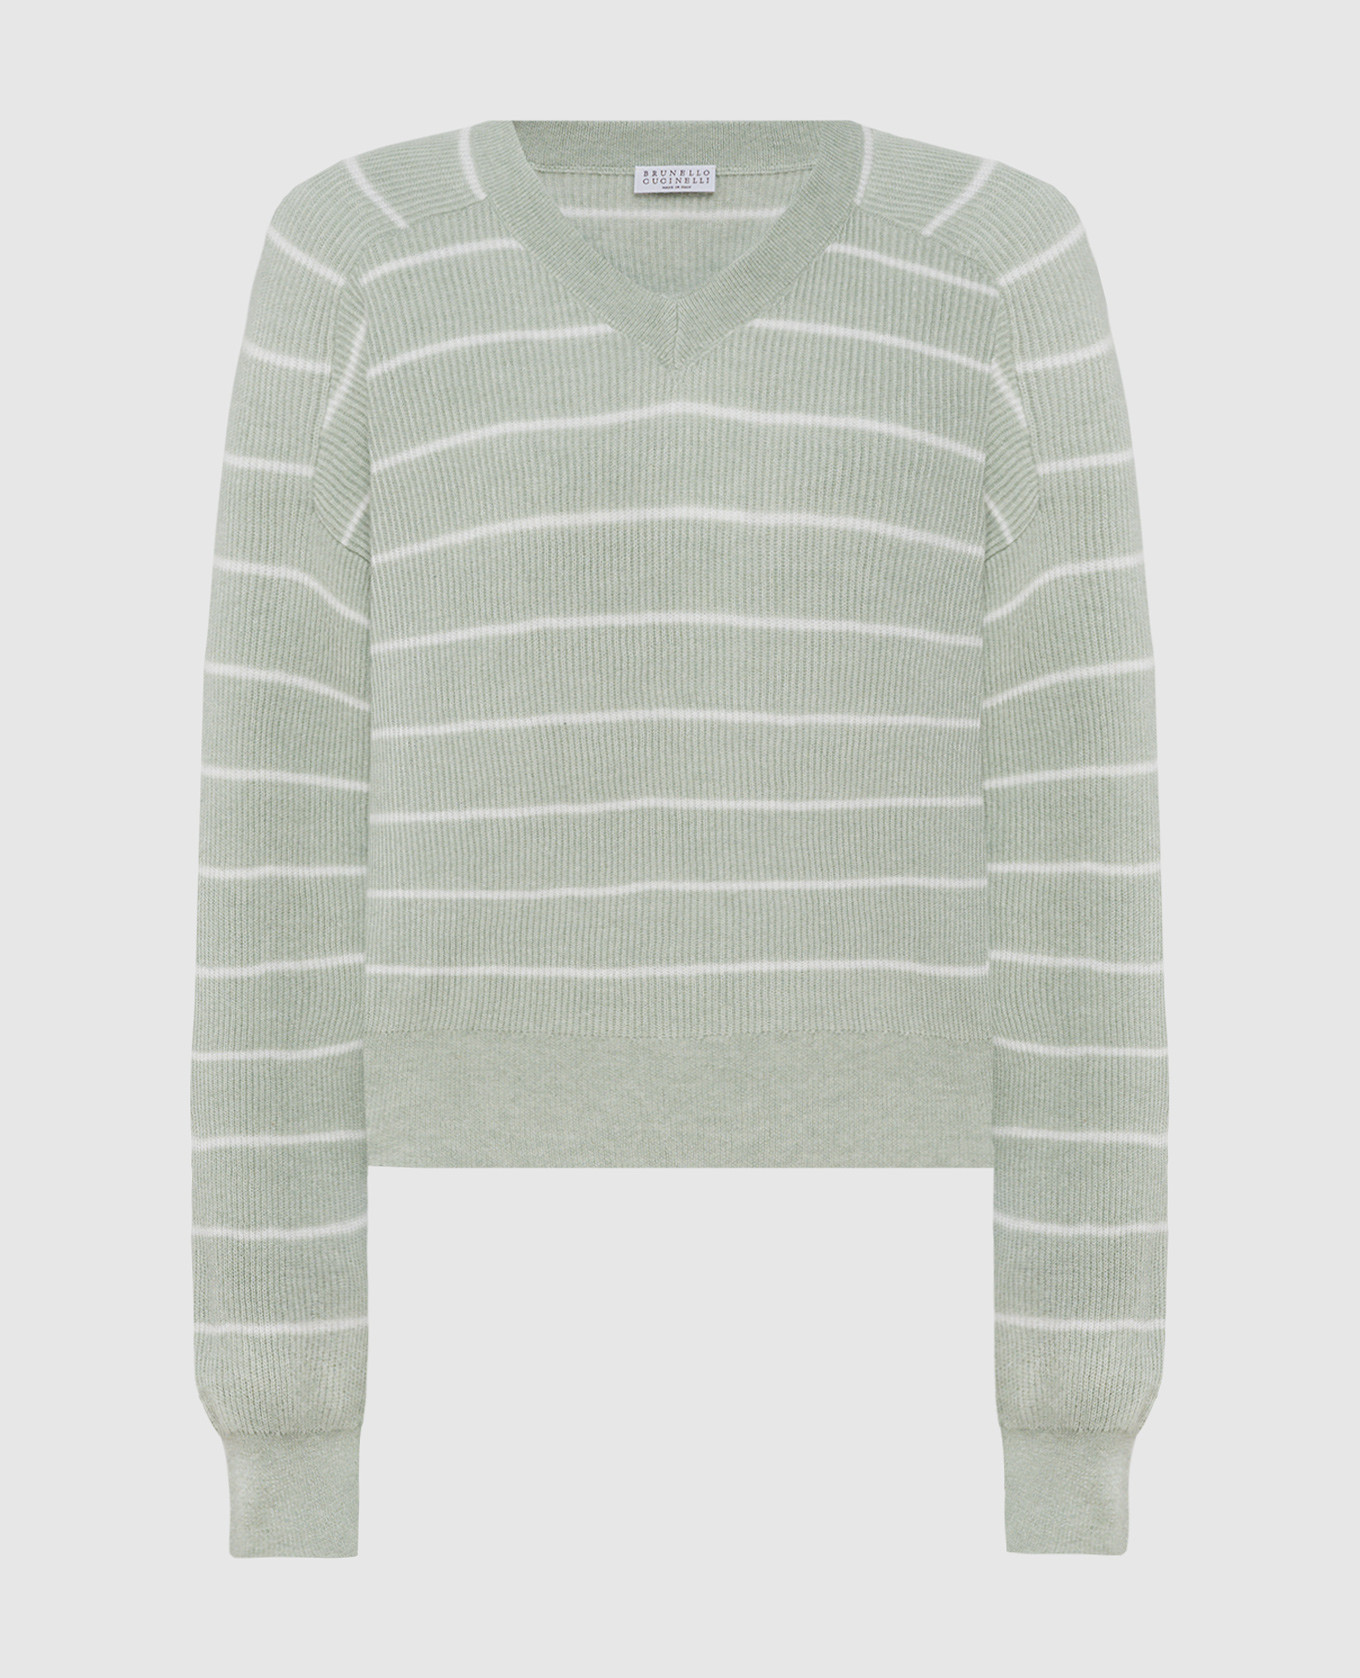 Green striped sweater with wool